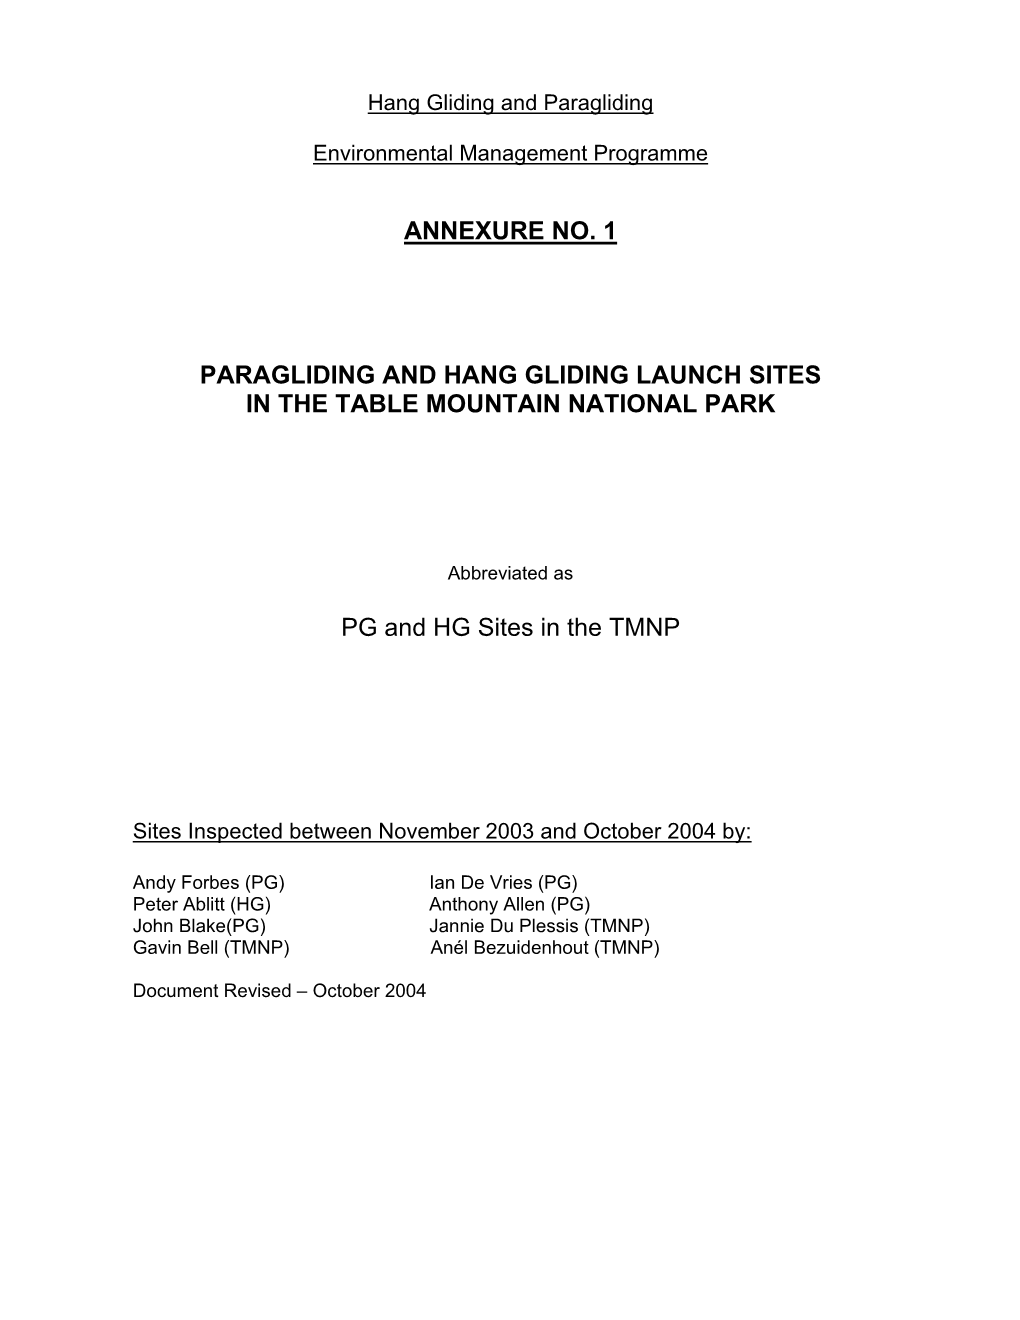 Annexure No. 1 Paragliding and Hang Gliding Launch Sites in the Table